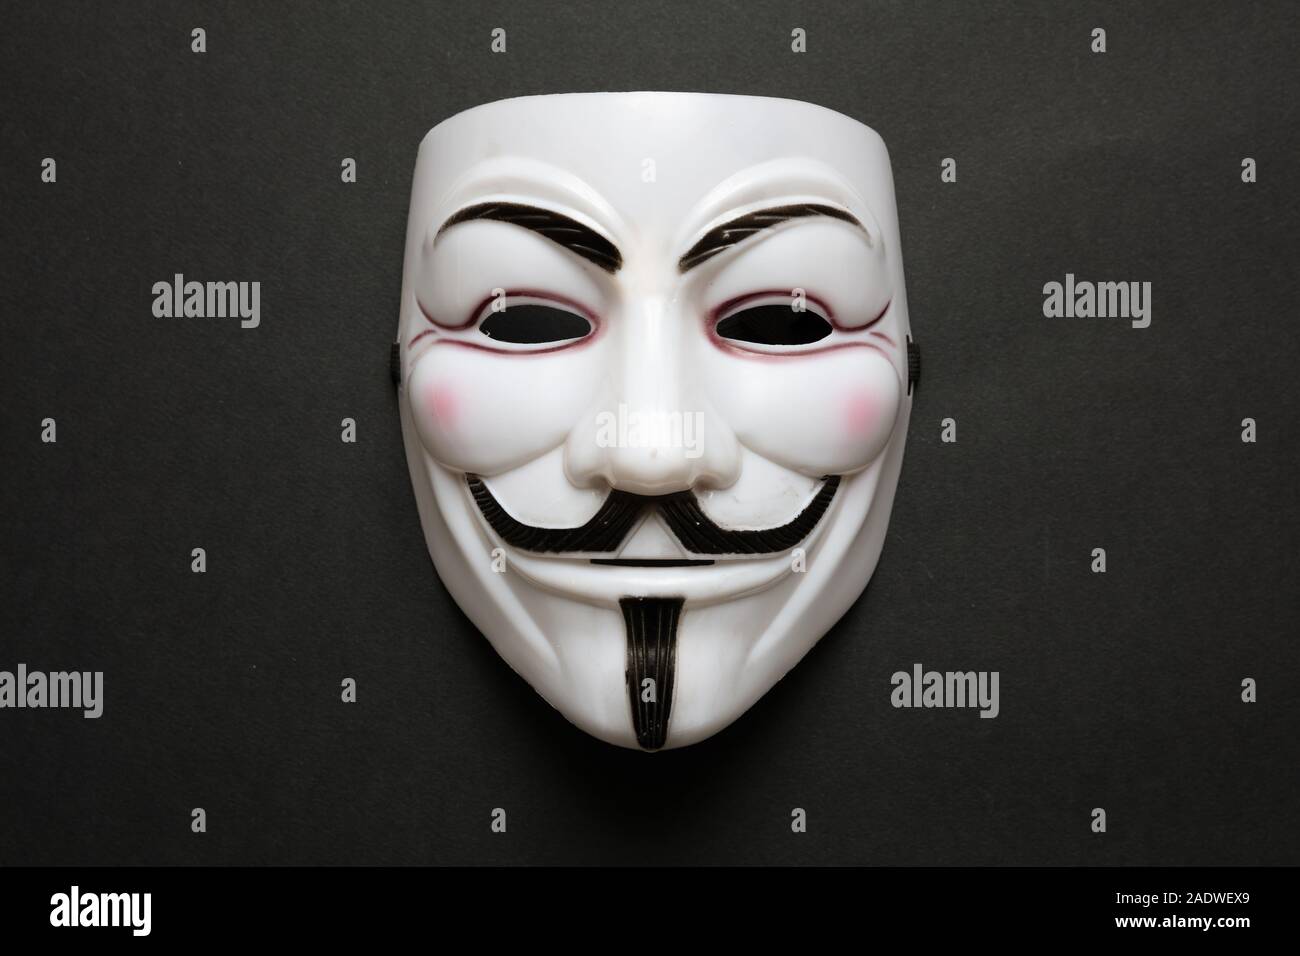 Vendetta face mask symbol of Anonymous online acktivist group against black background, closeup view. Stock Photo